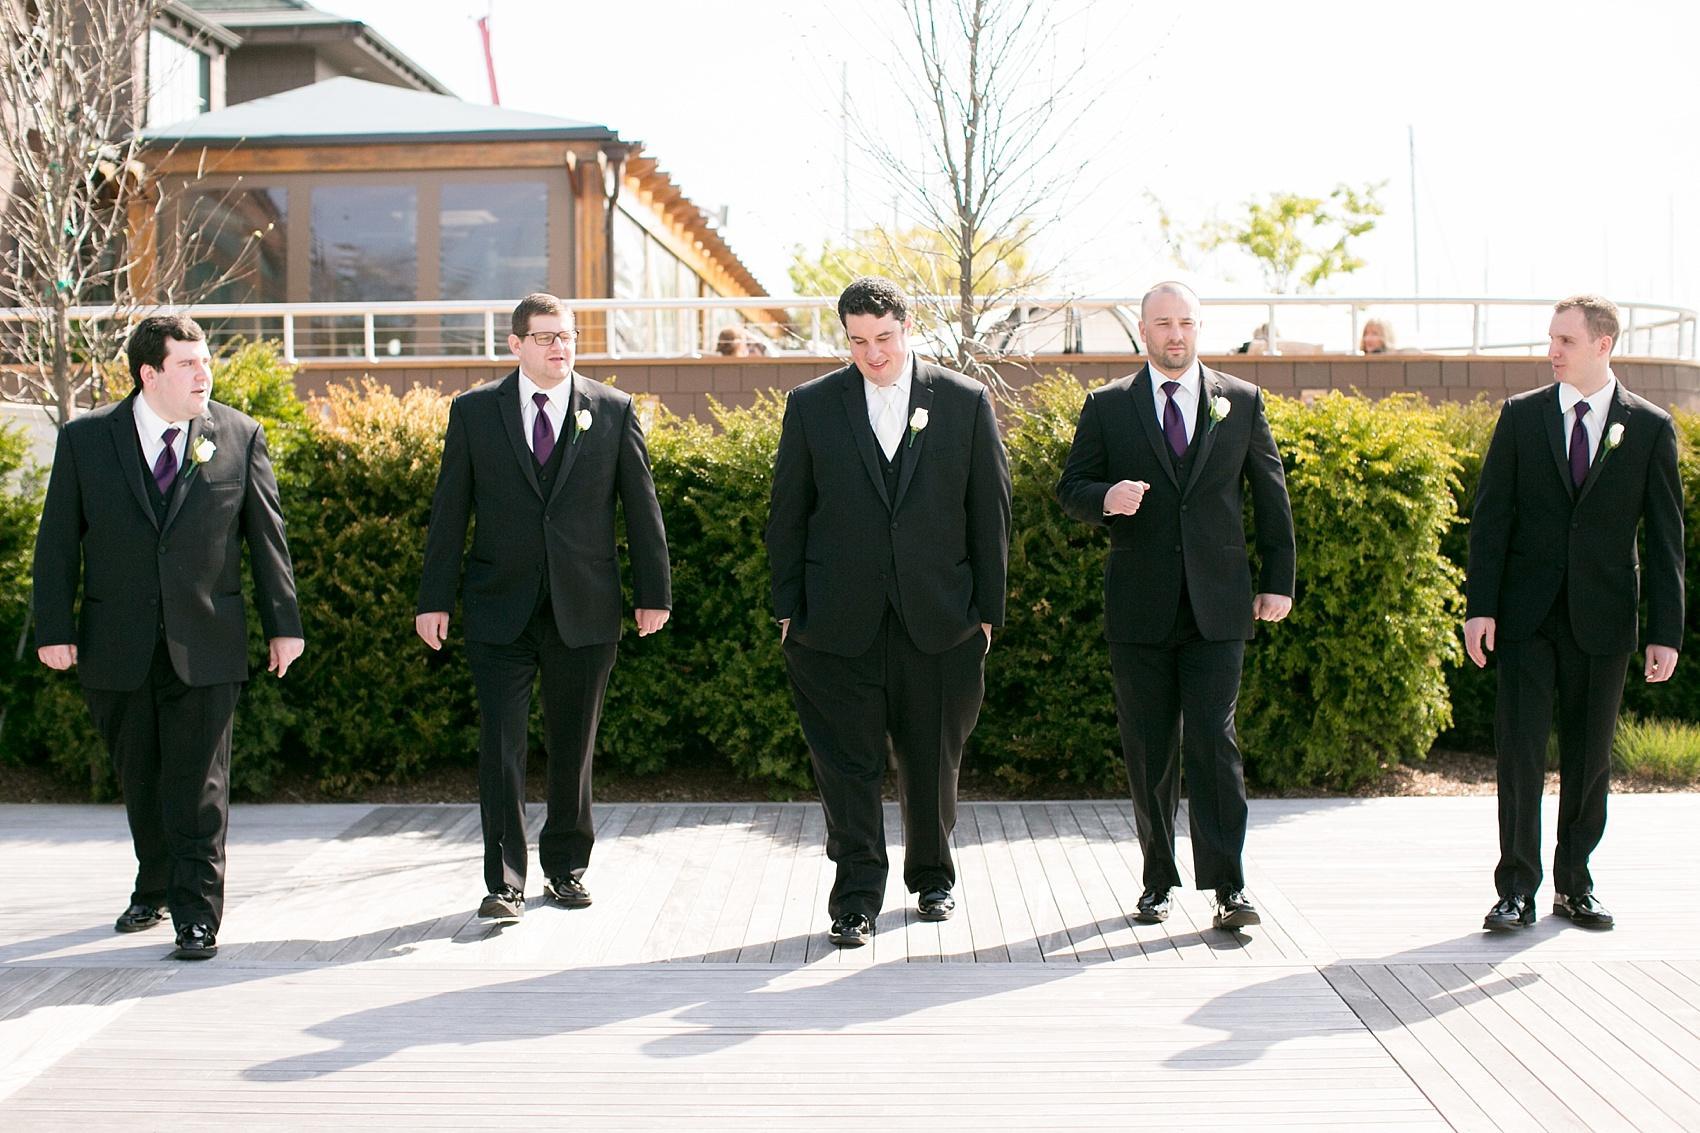 Photos by Mikkel Paige Photography for a wedding at Harbor Club on Long Island. Groomsmen in classic black for waterfront nuptials.